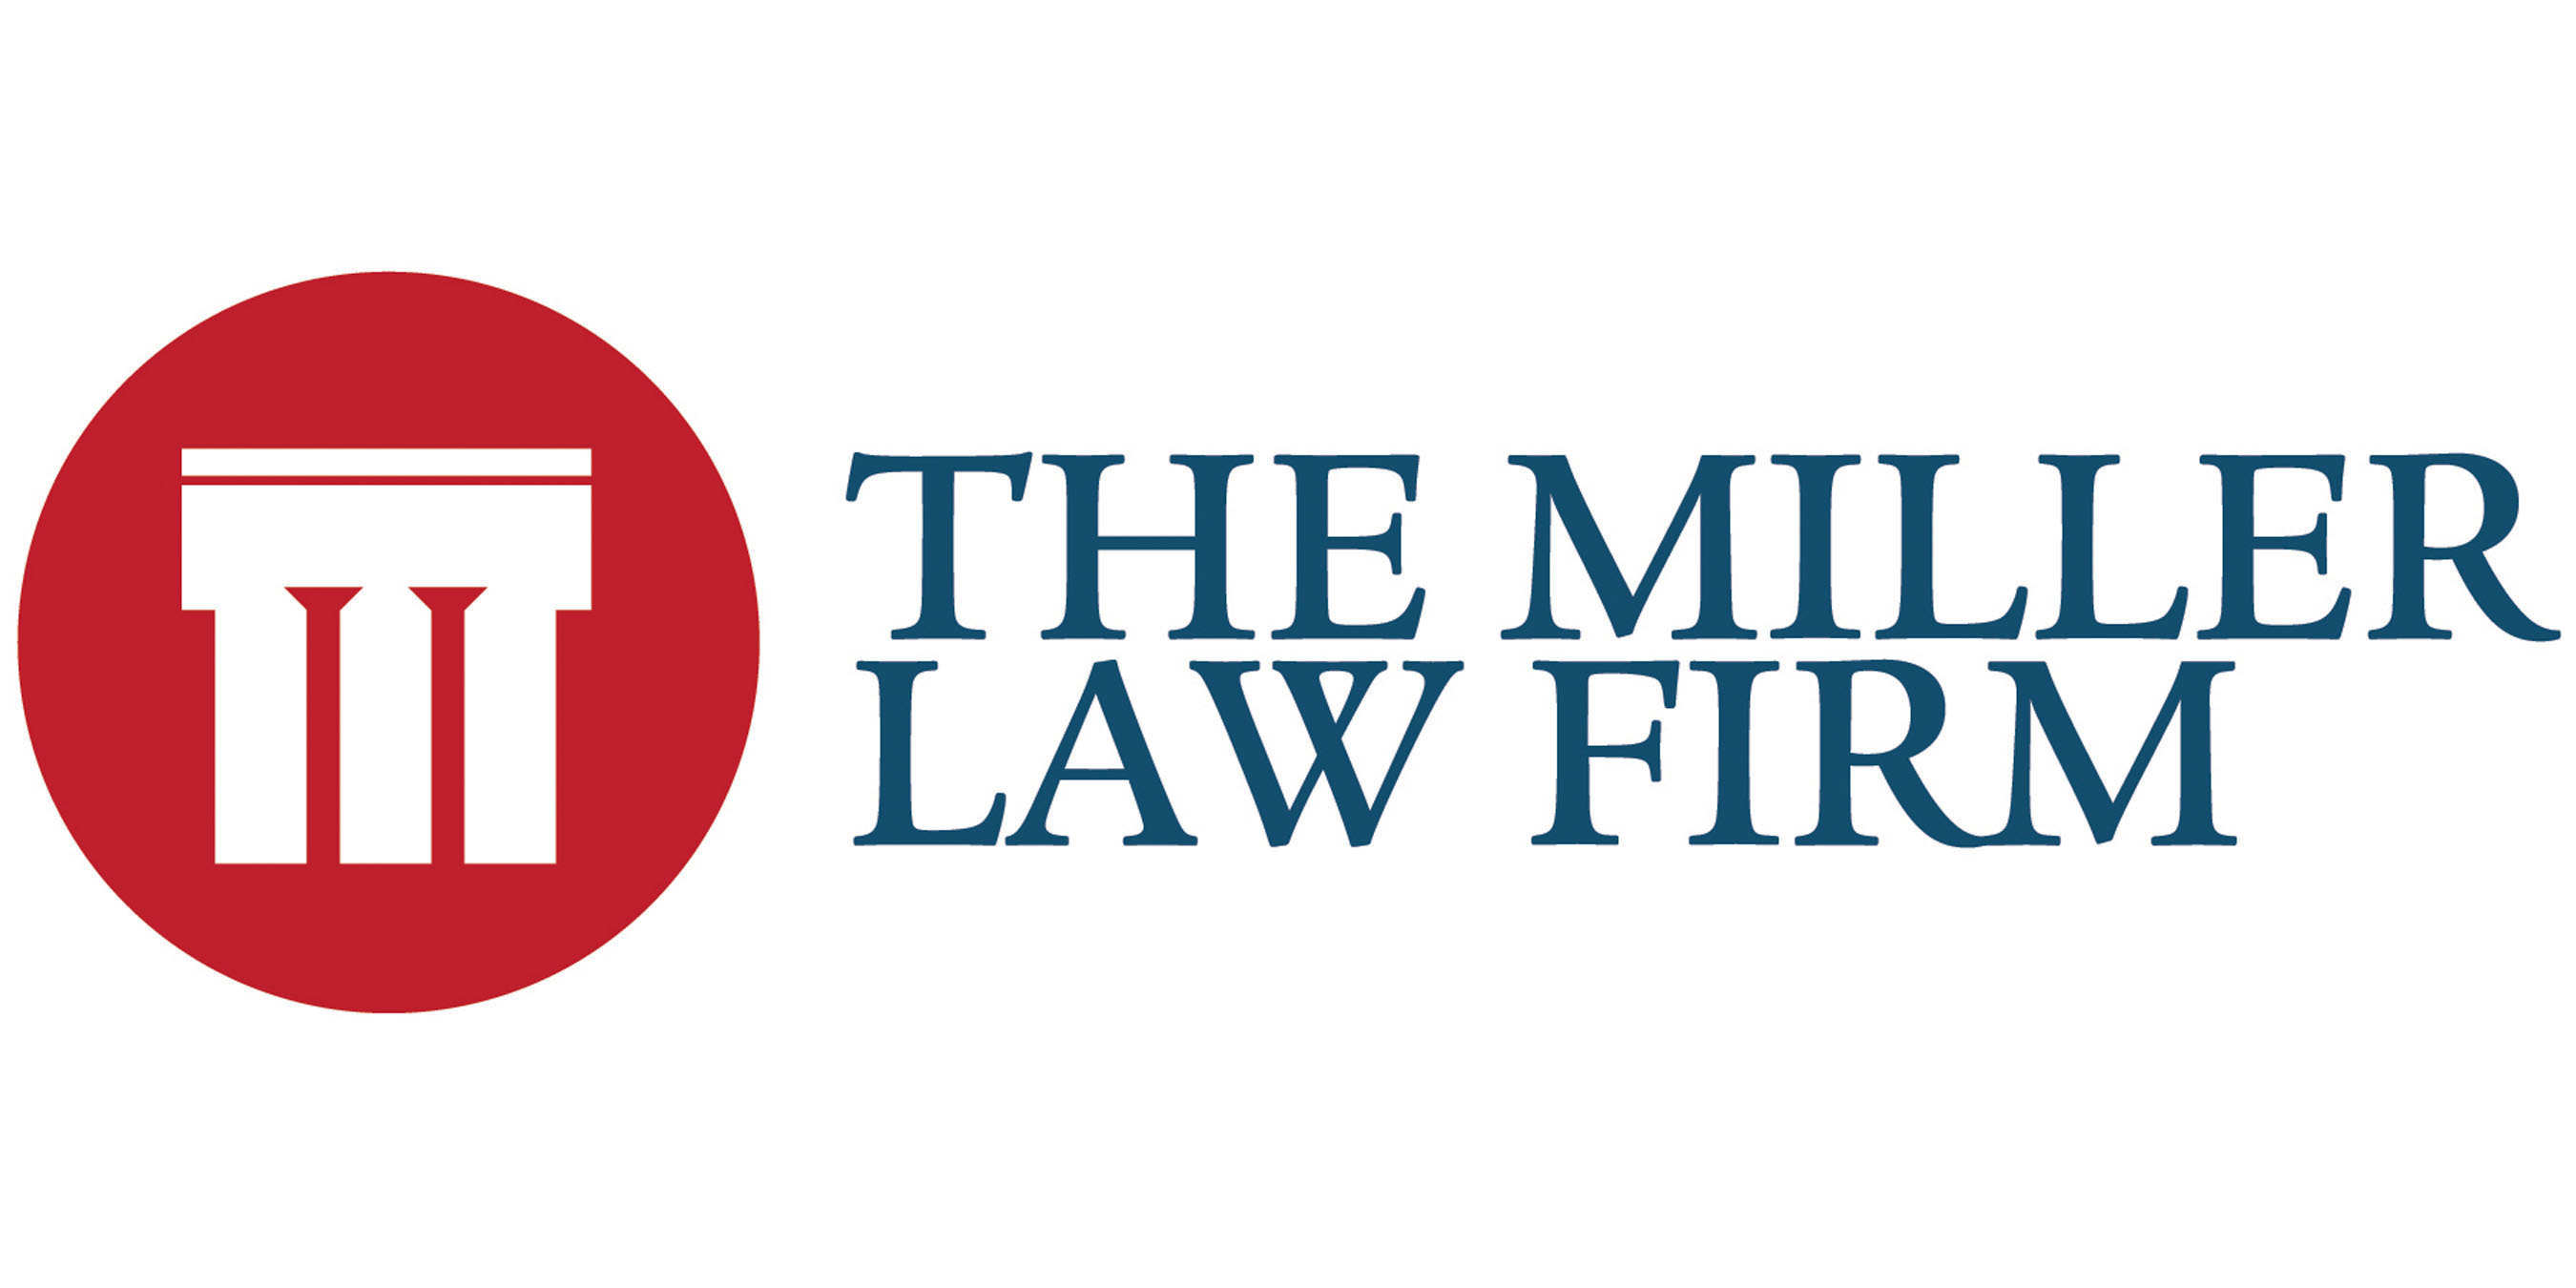 The Miller Law Firm logo.